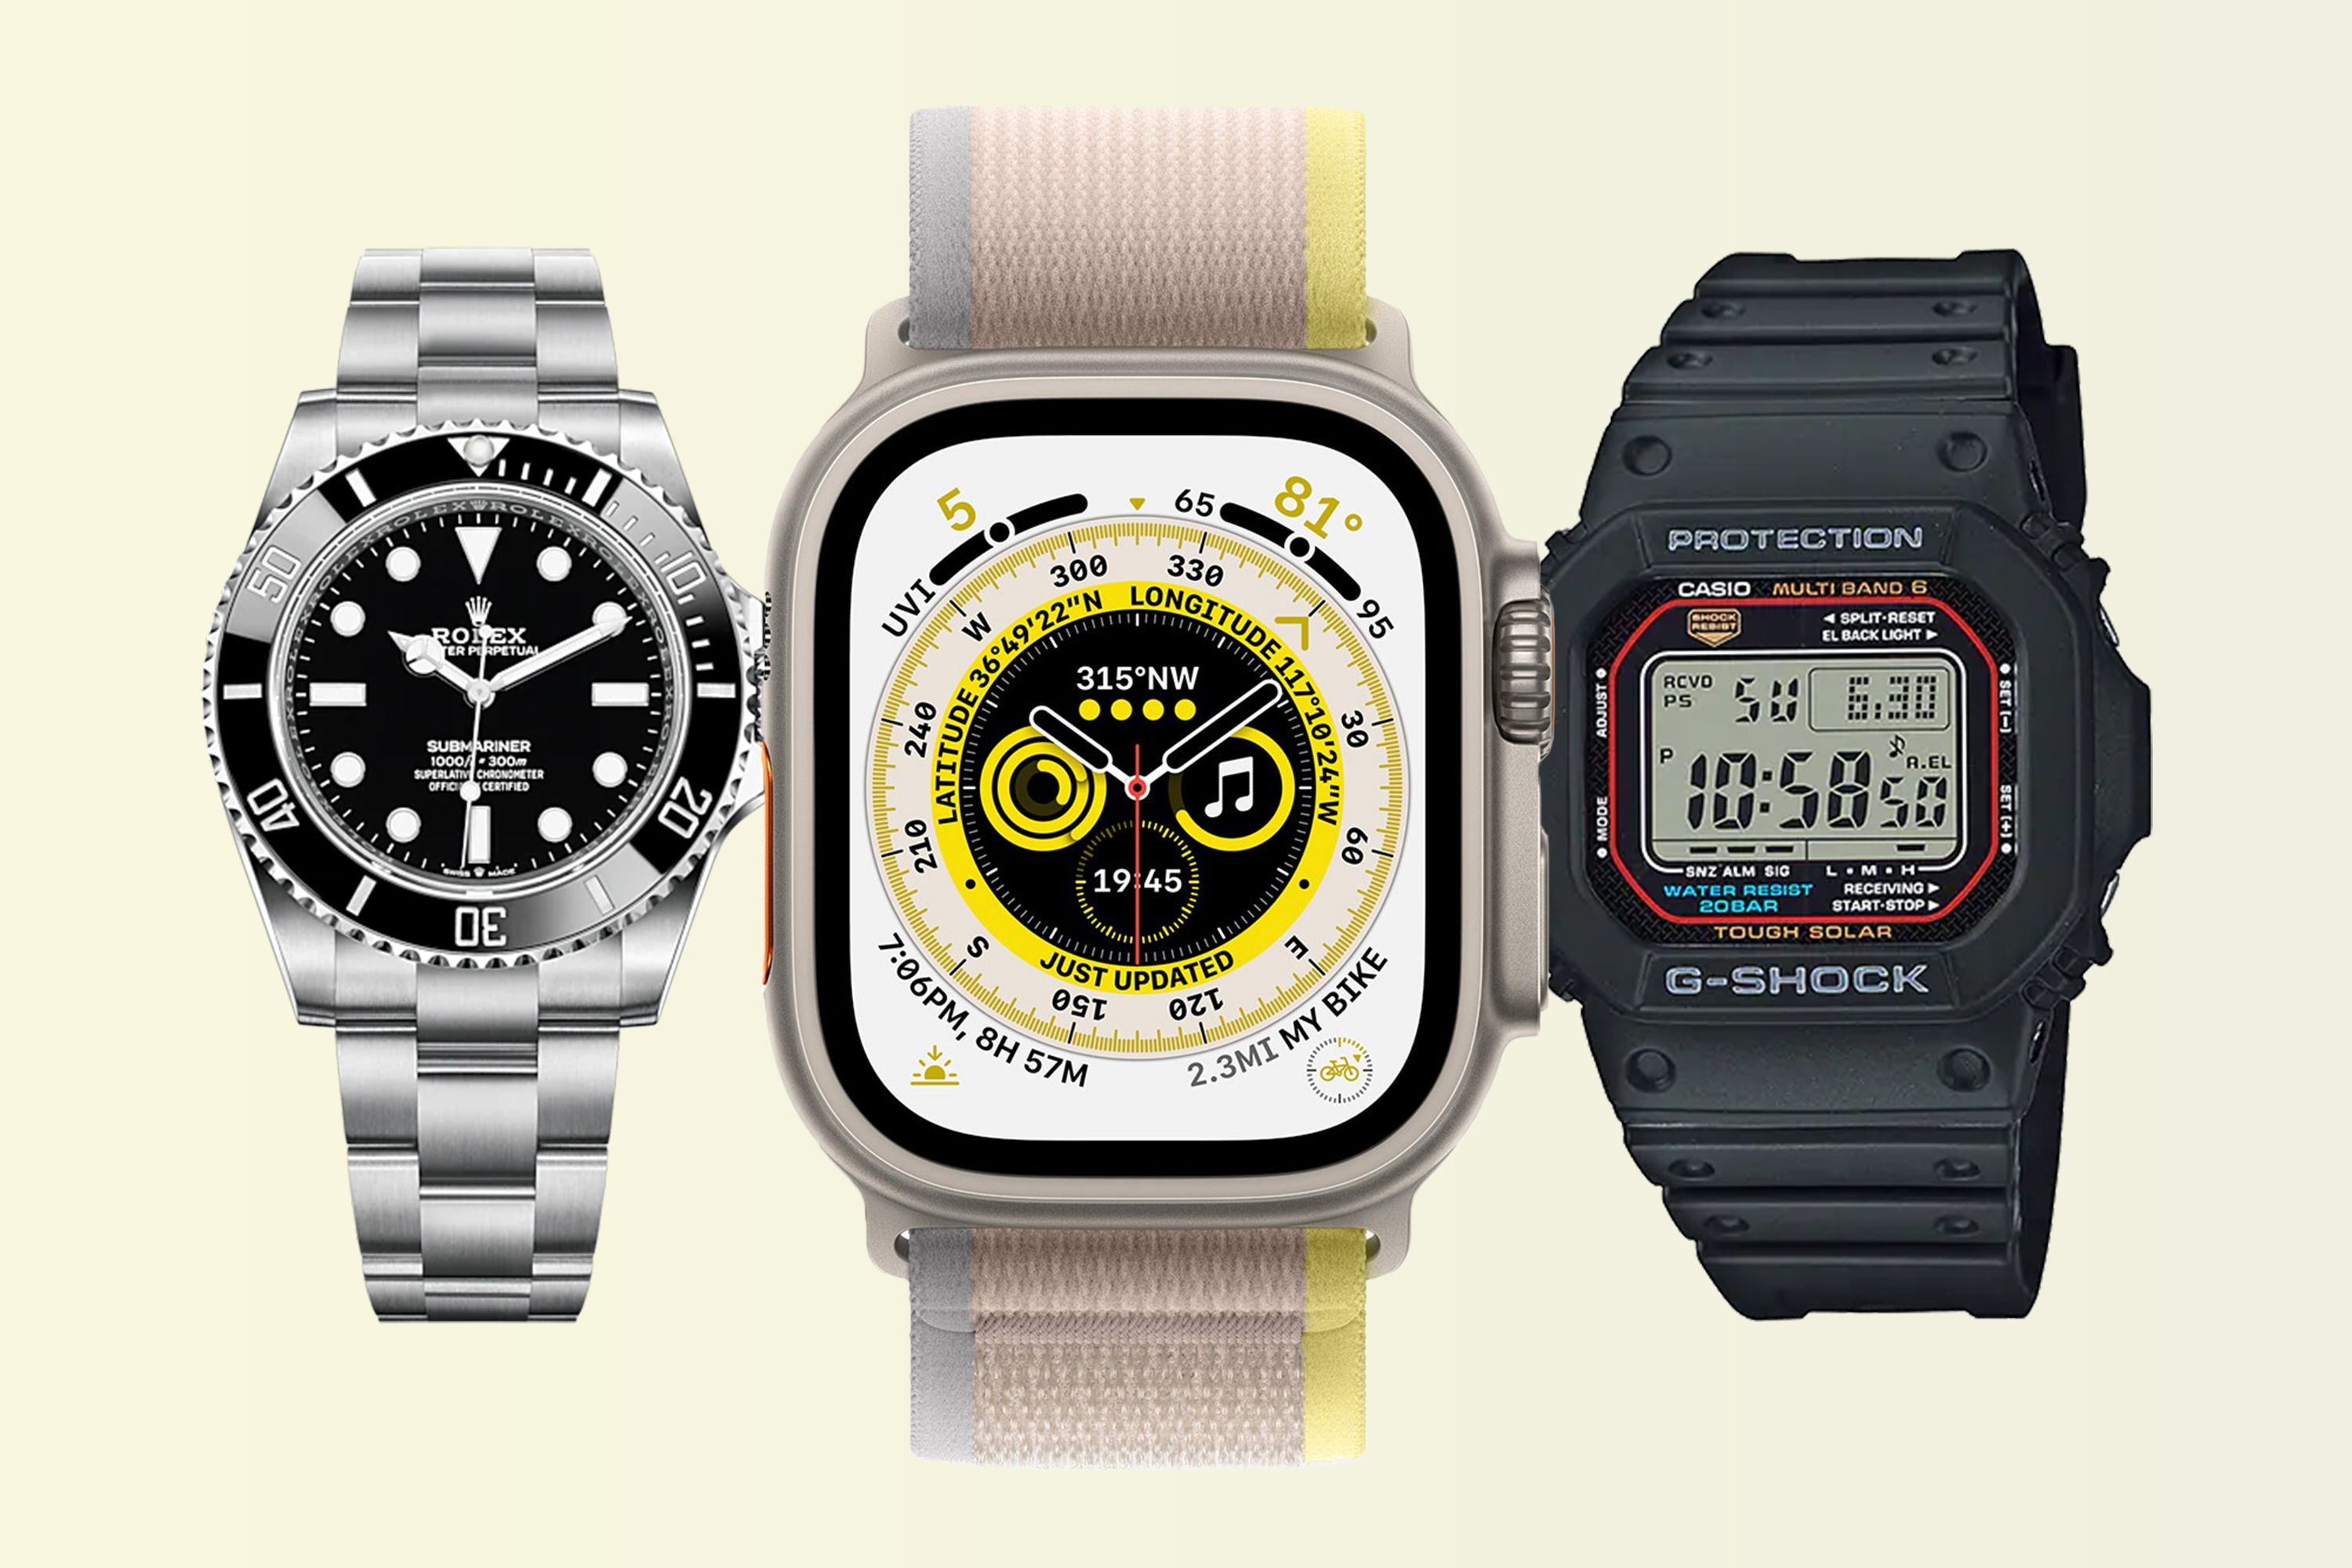 The Apple Watch Ultra Is Bigger Than a Rolex Submariner or a G-Shock